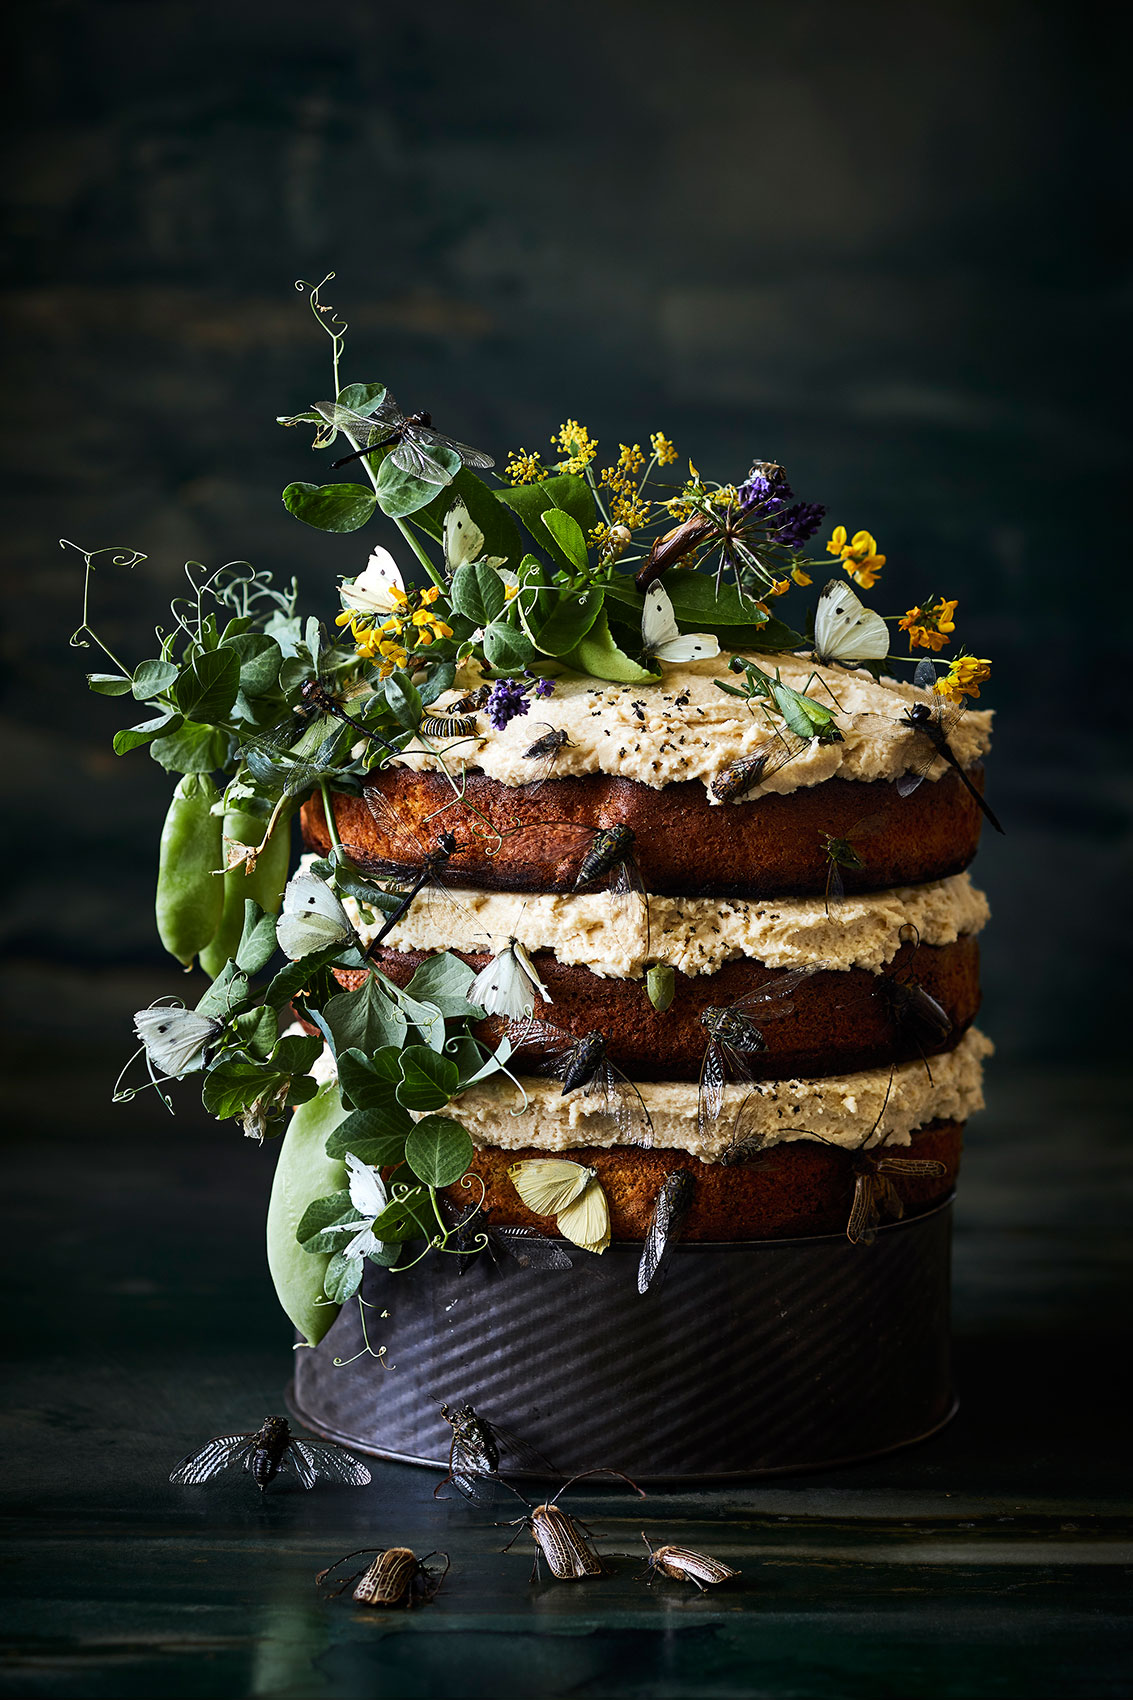 The Bug Project • Picnic Honey Cake with Wild Foliage • Advertising & Editorial Food Photography